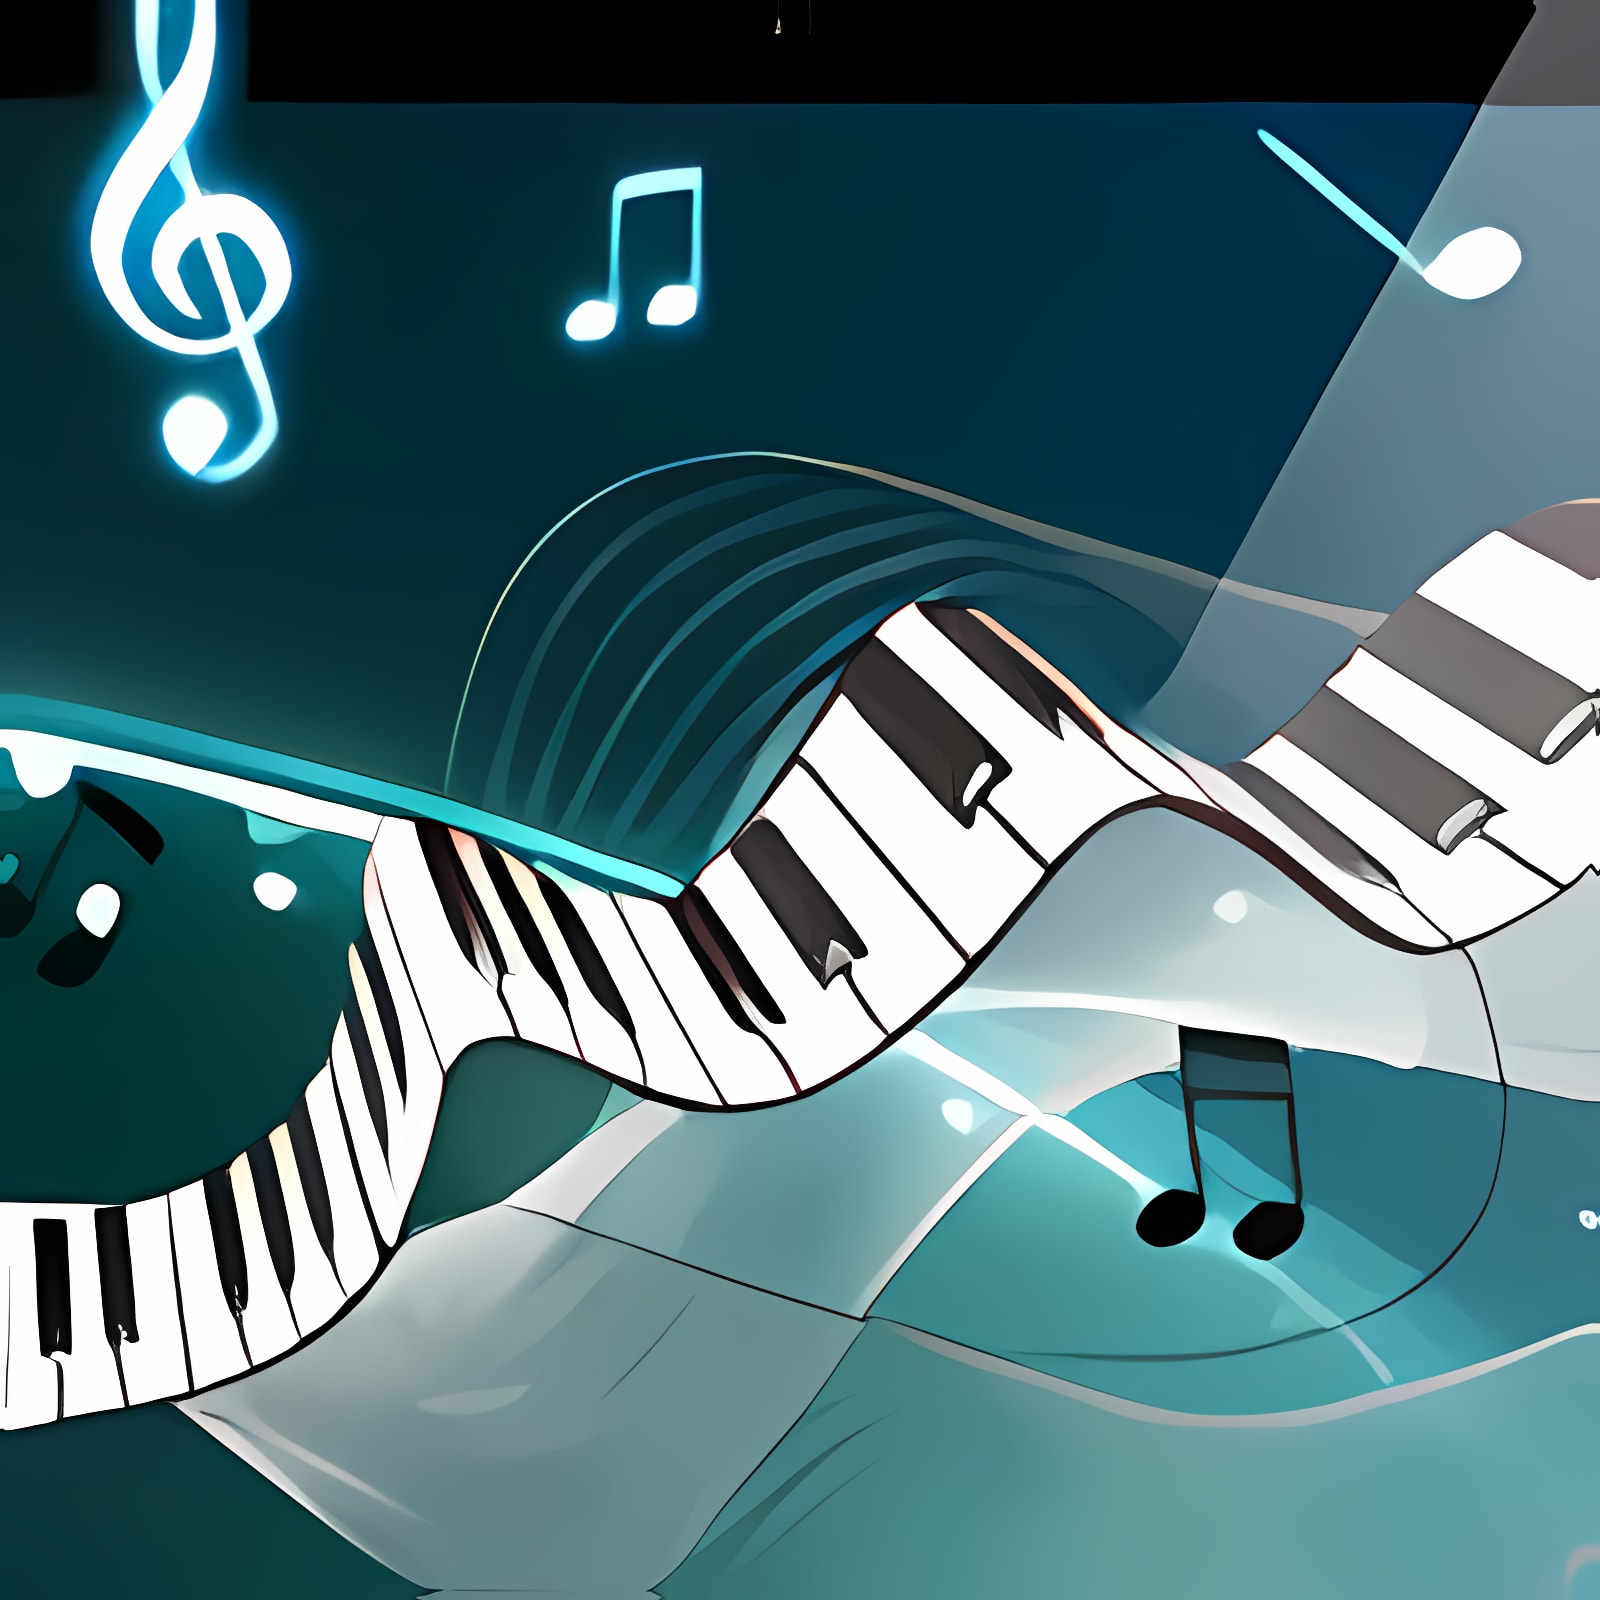 download the last version for apple Everyone Piano 2.5.7.28